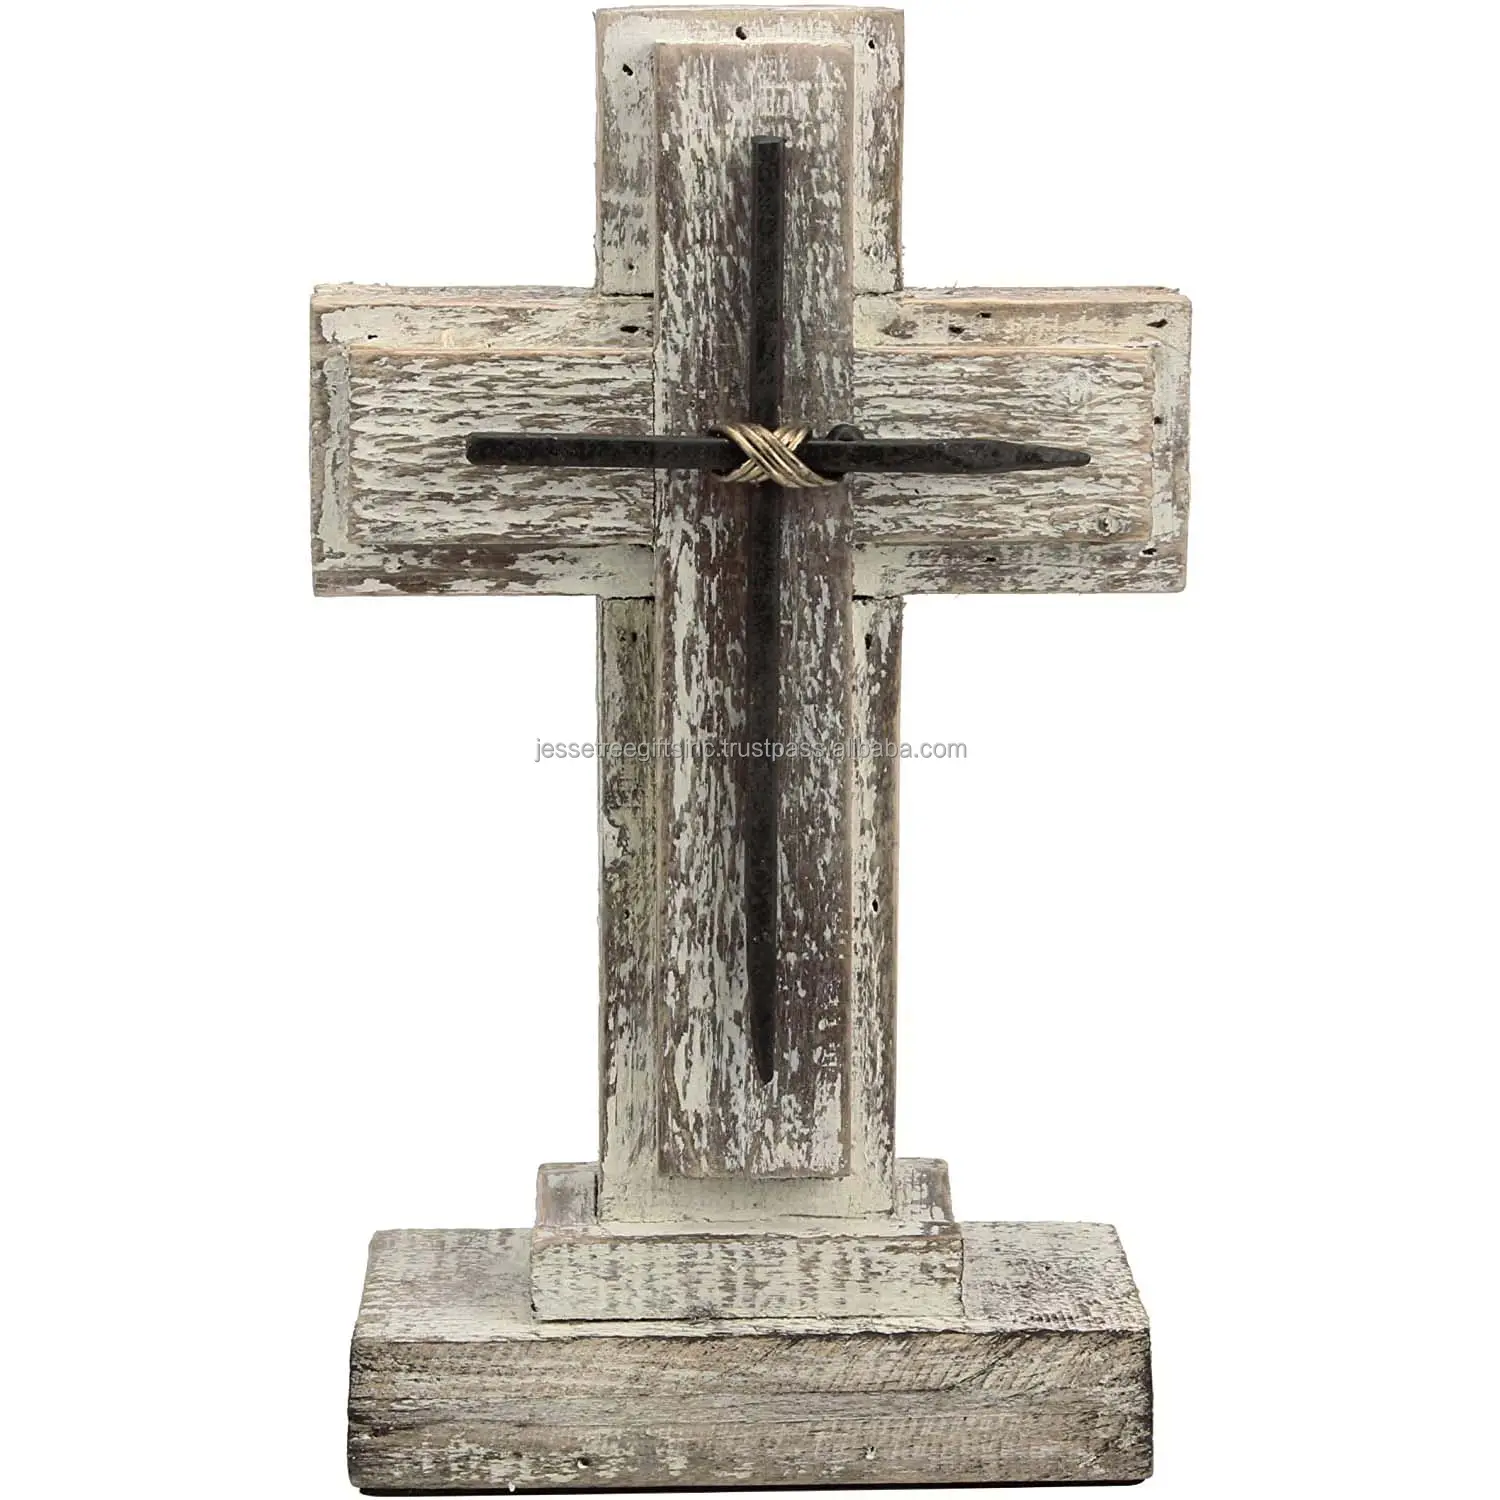 Handmade Wooden Tabletop Cross With White Wash Finishing Metal Rod Cross Inlay Design Excellent Quality For Church